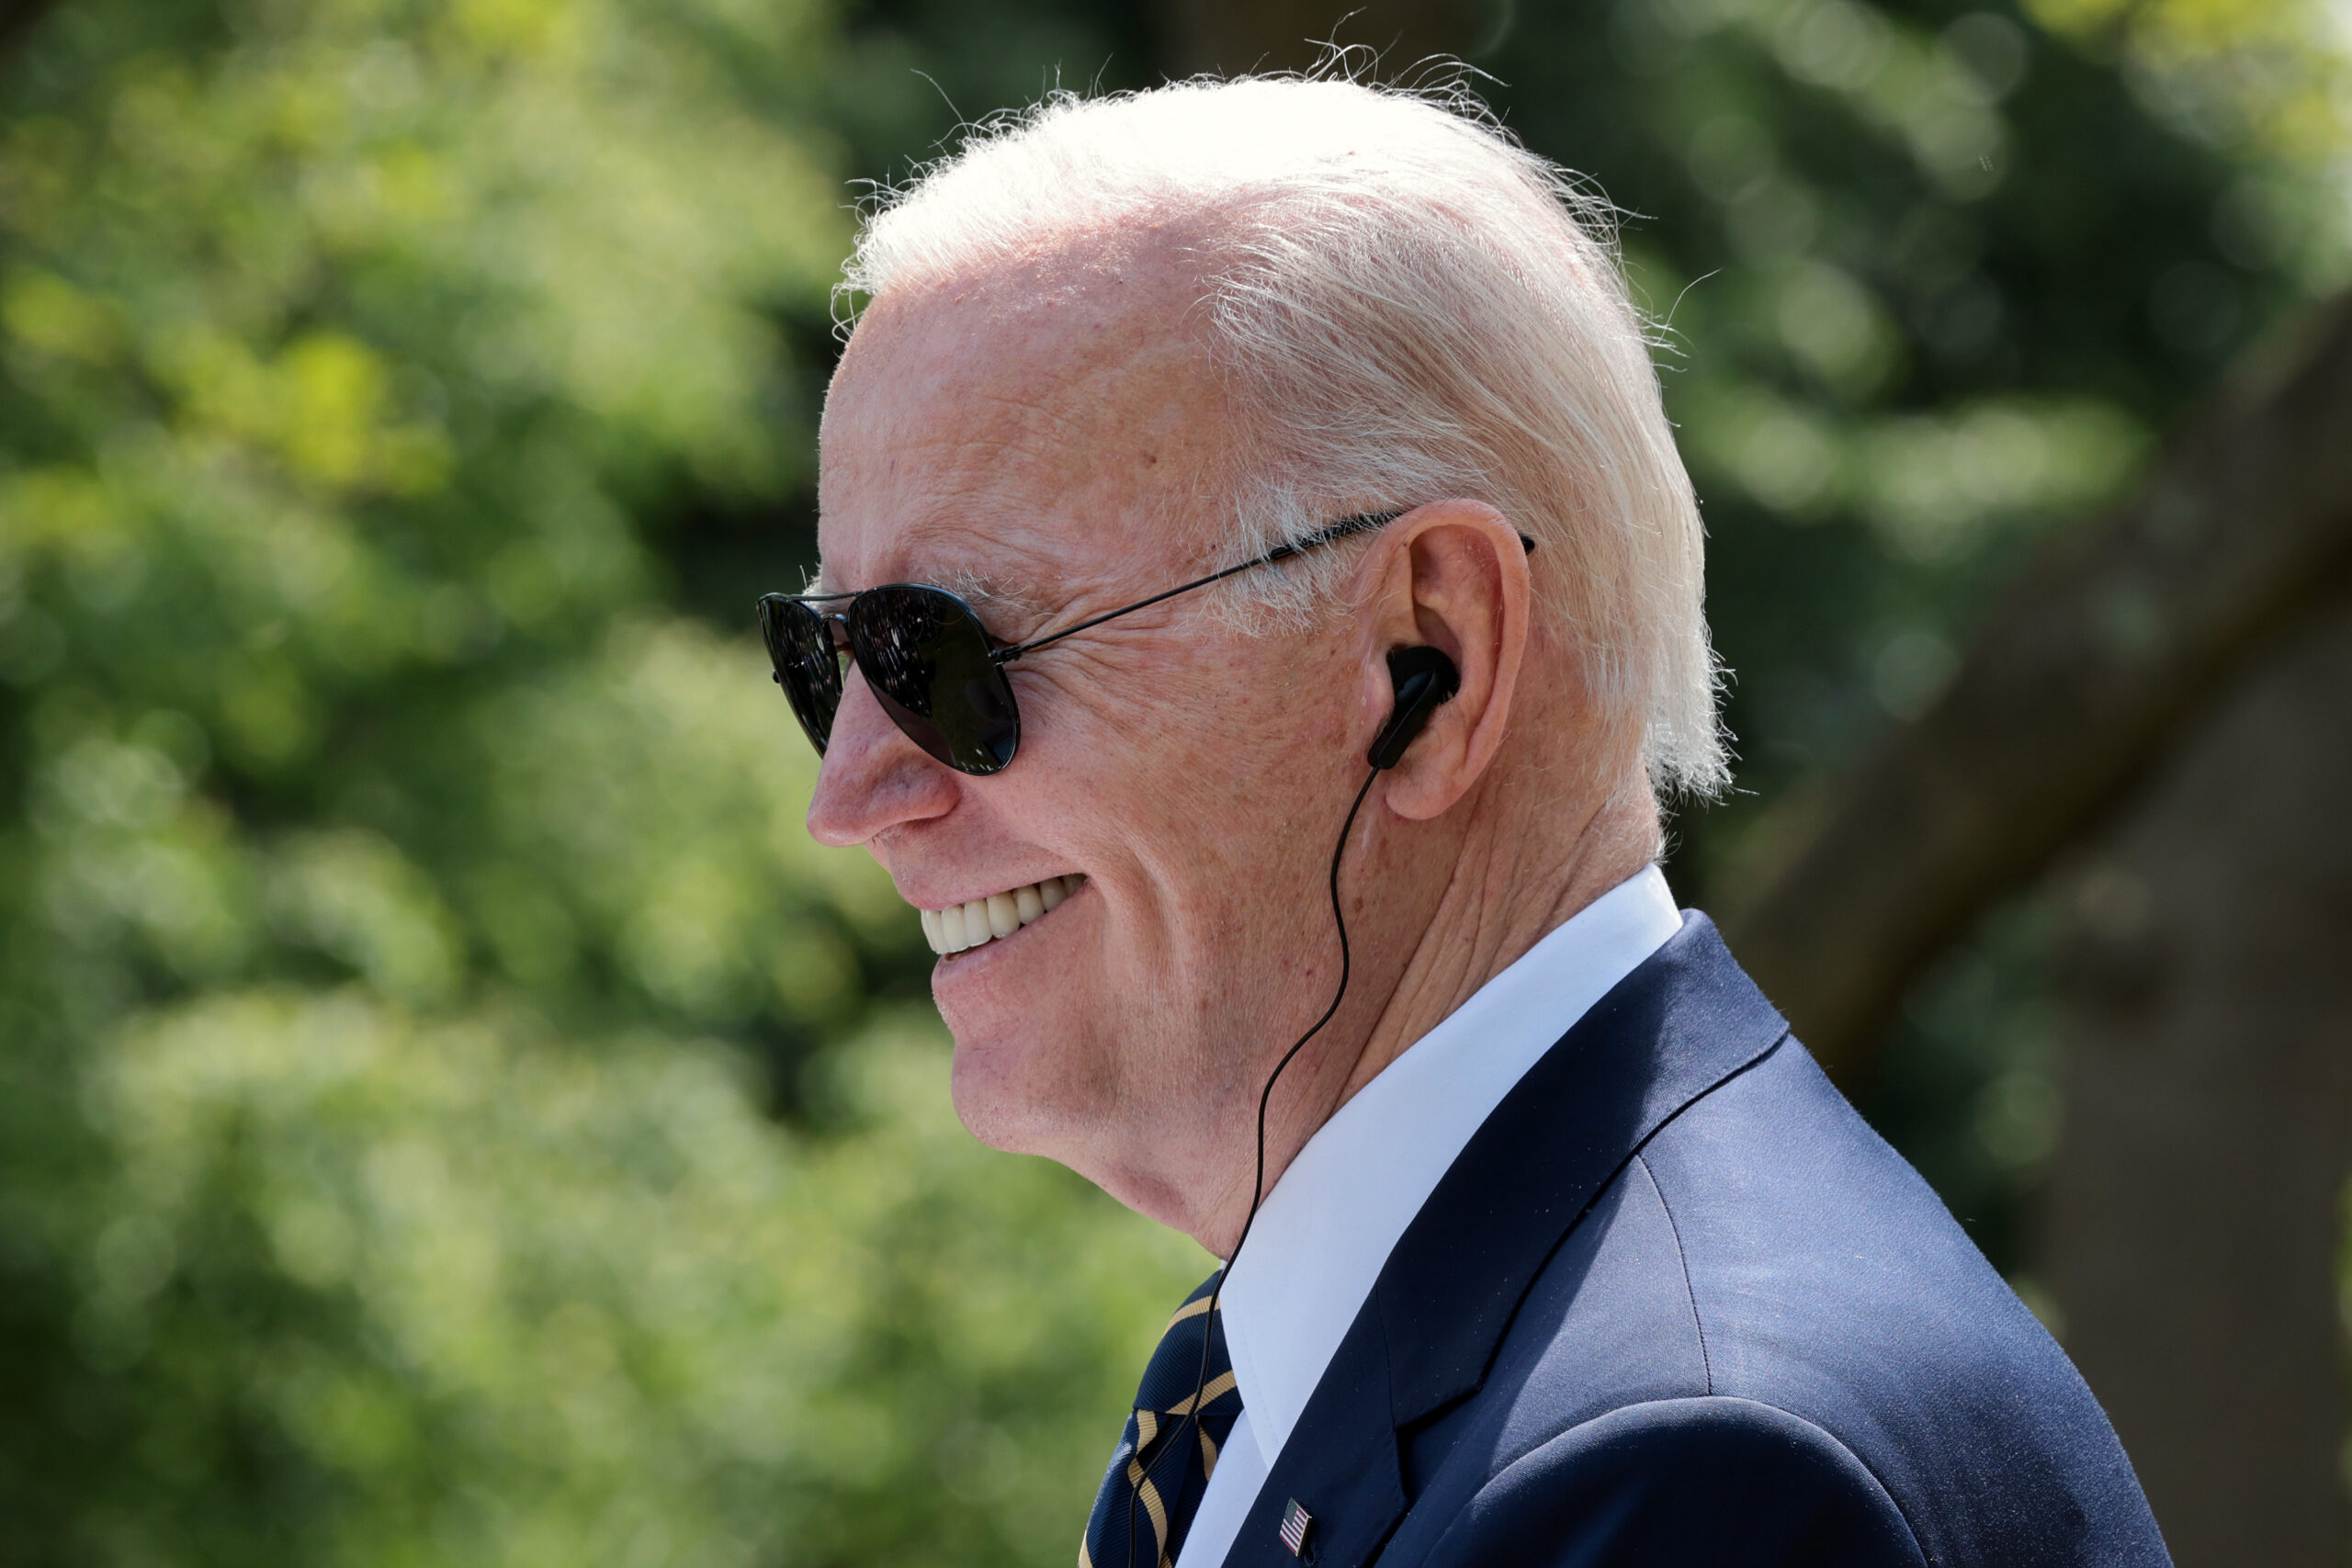 Never mind that huge climate law — some greens are bashing Biden